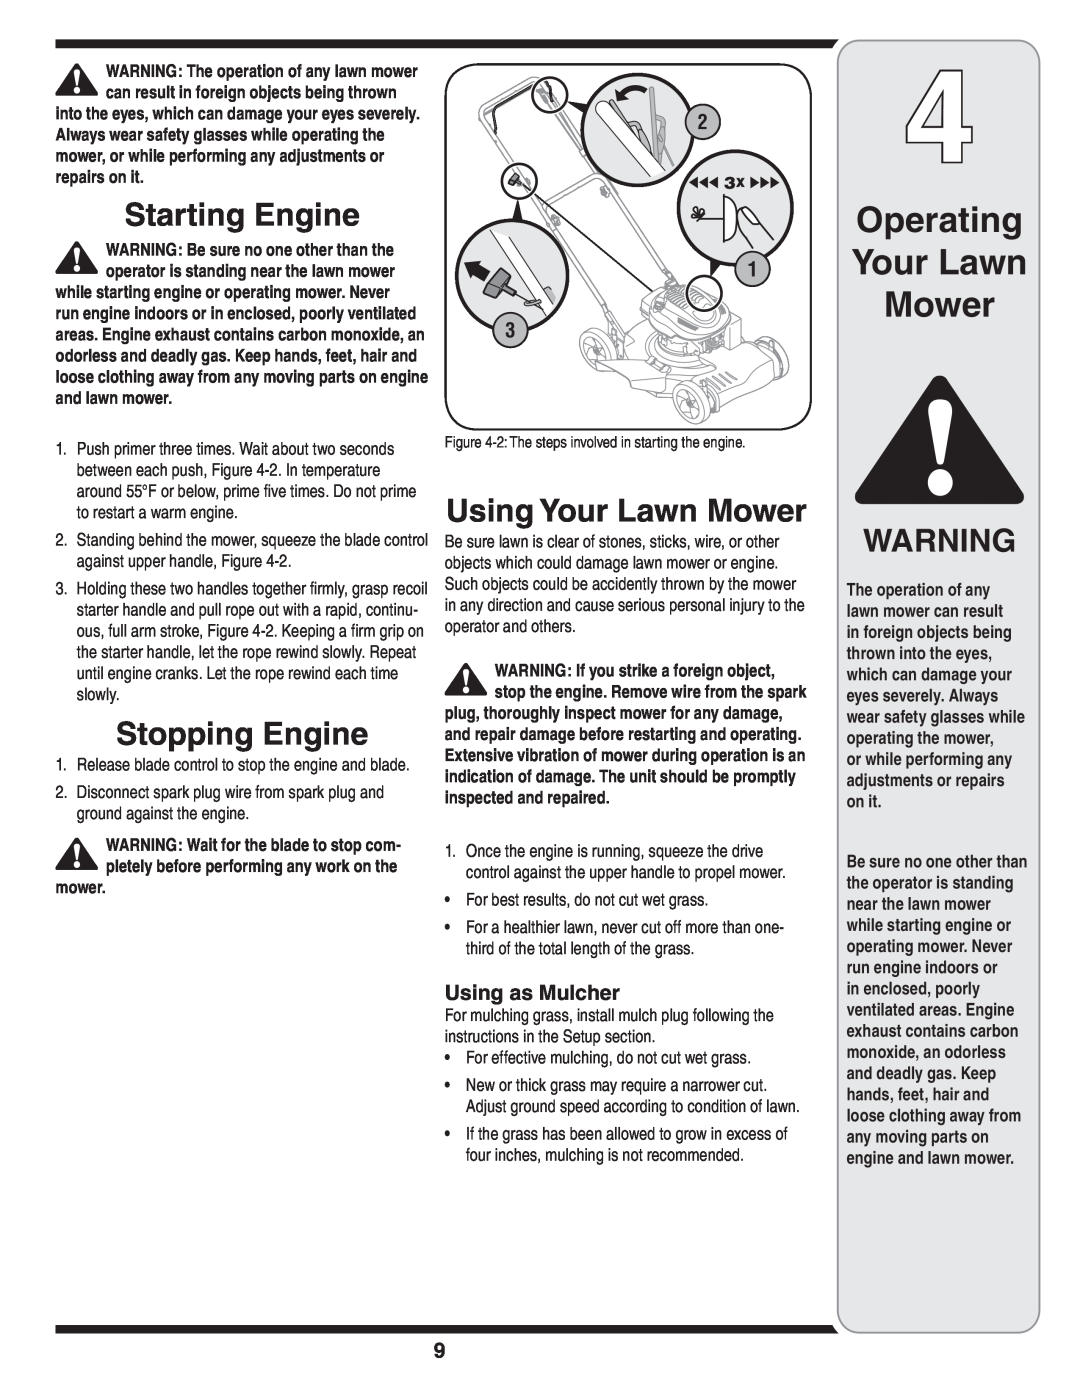 Yard-Man 263 warranty Starting Engine, Stopping Engine, Using Your Lawn Mower, Operating Your Lawn Mower, and lawn mower 